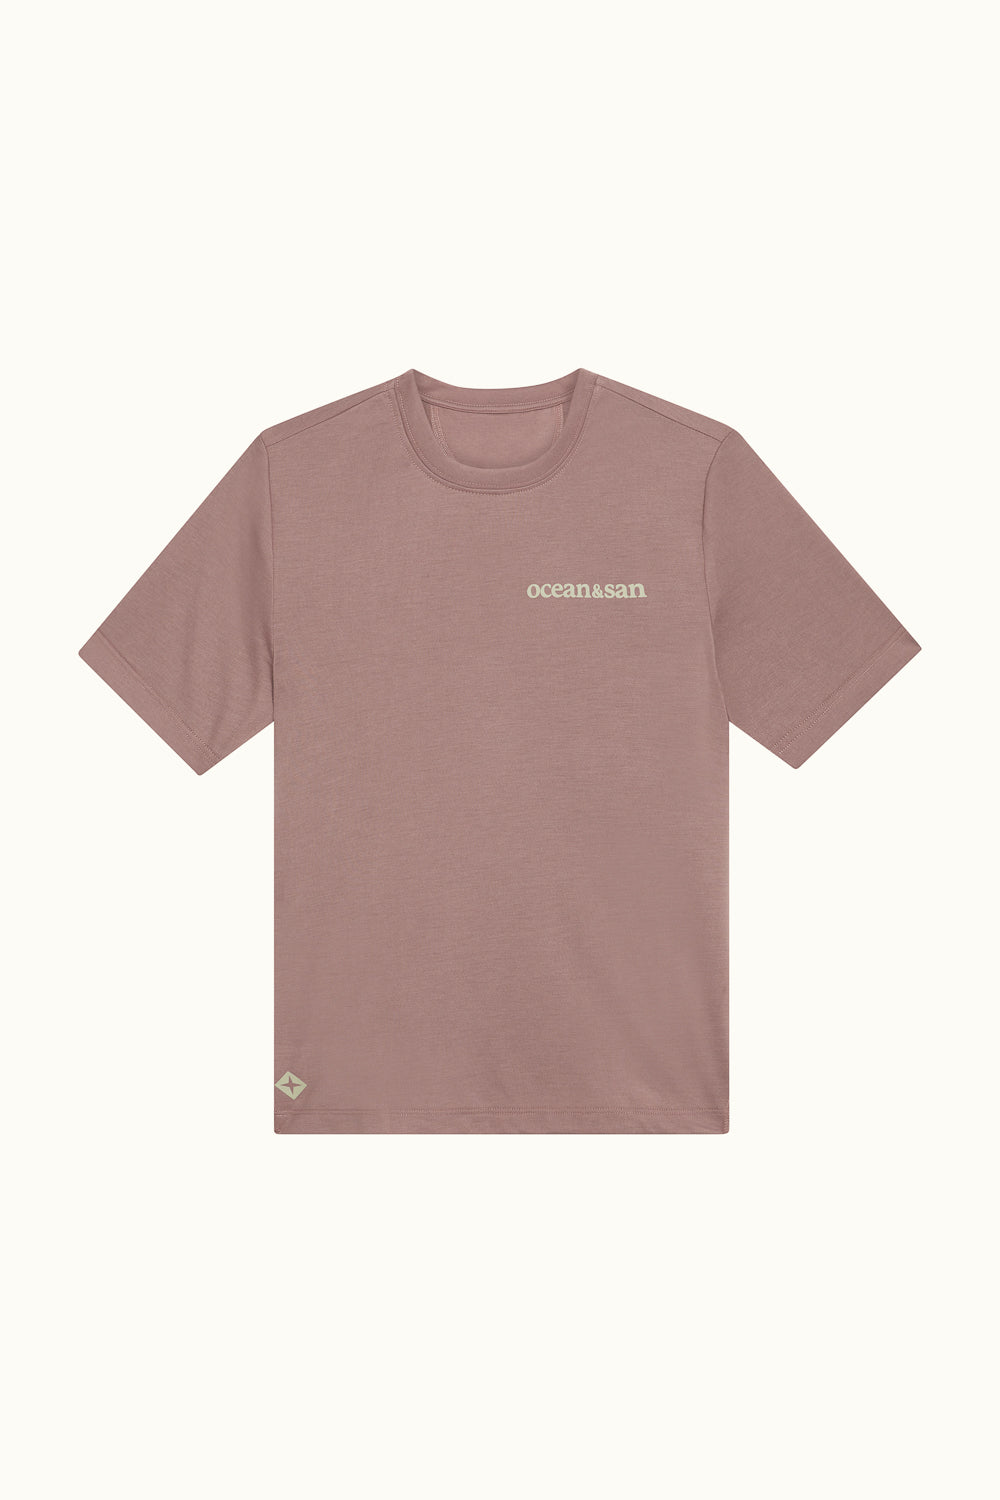 Every Day Thermal L/S Tee - Washed Mauve, mnml